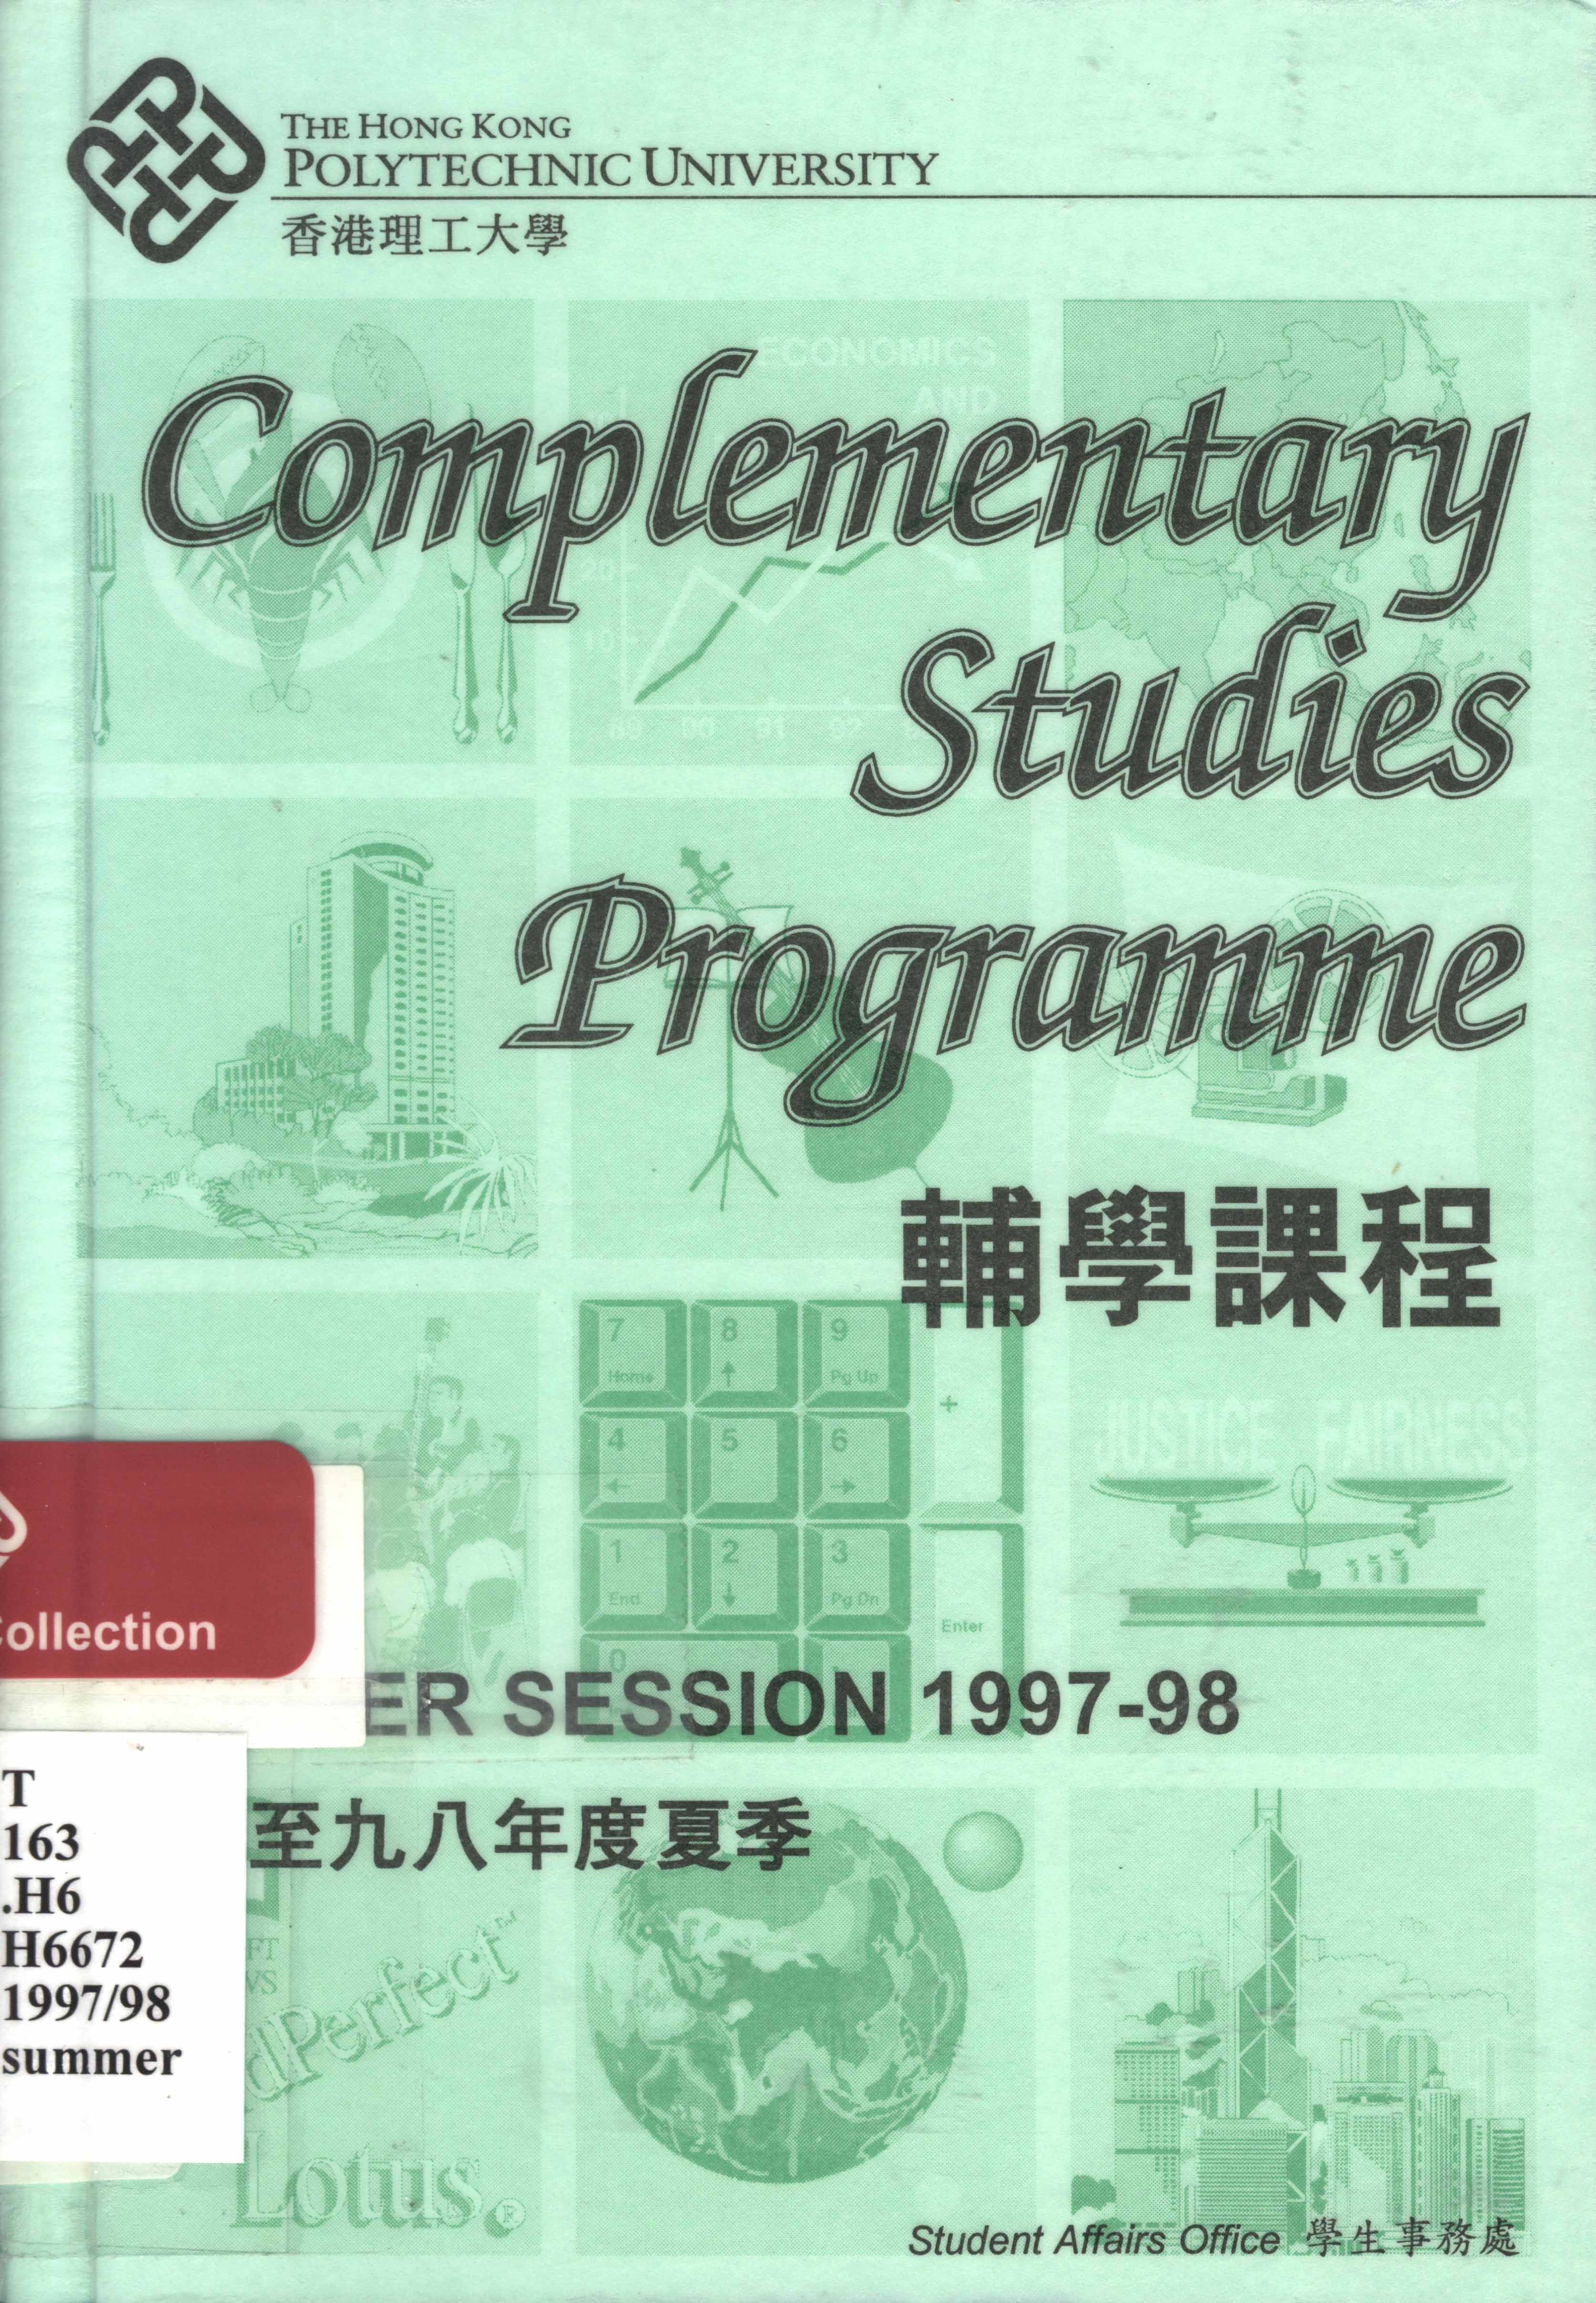 Complementary studies programme Summer session 1997-98